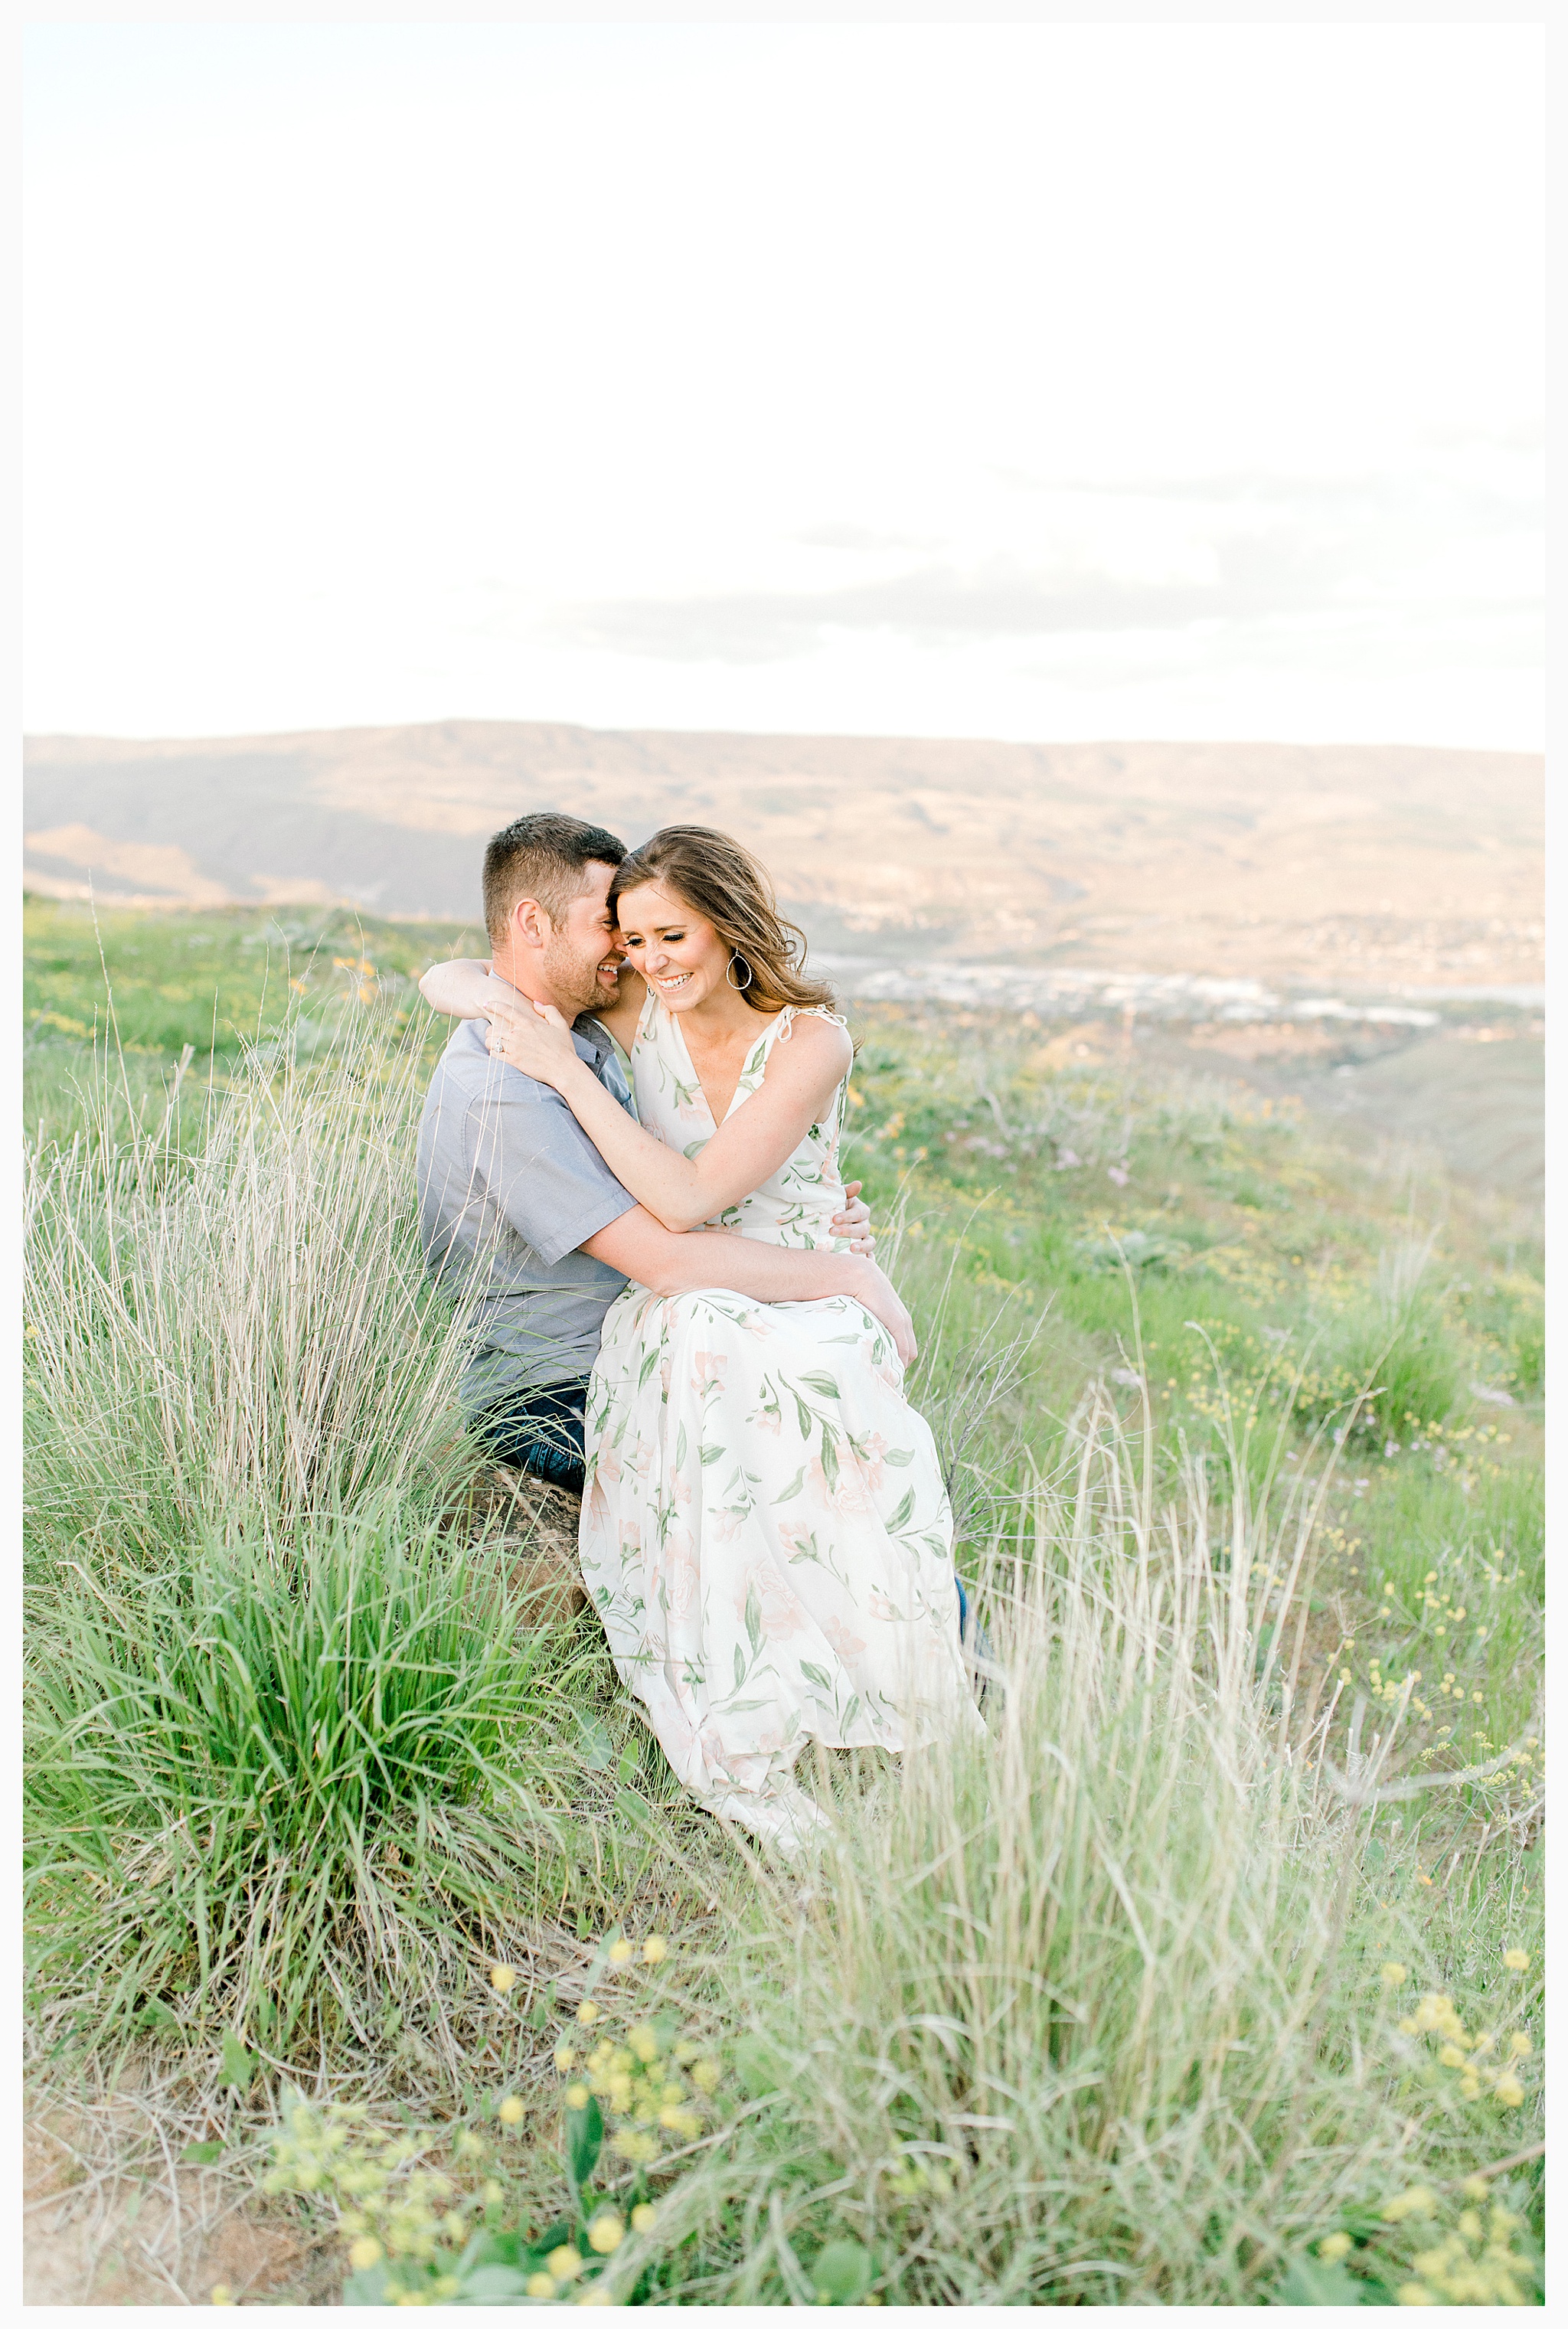 Engagement session amongst the wildflowers in Wenatchee, Washington | Engagement Session Outfit Inspiration for Wedding Photography with Emma Rose Company | Light and Airy PNW Photographer, Seattle Bride_0021.jpg